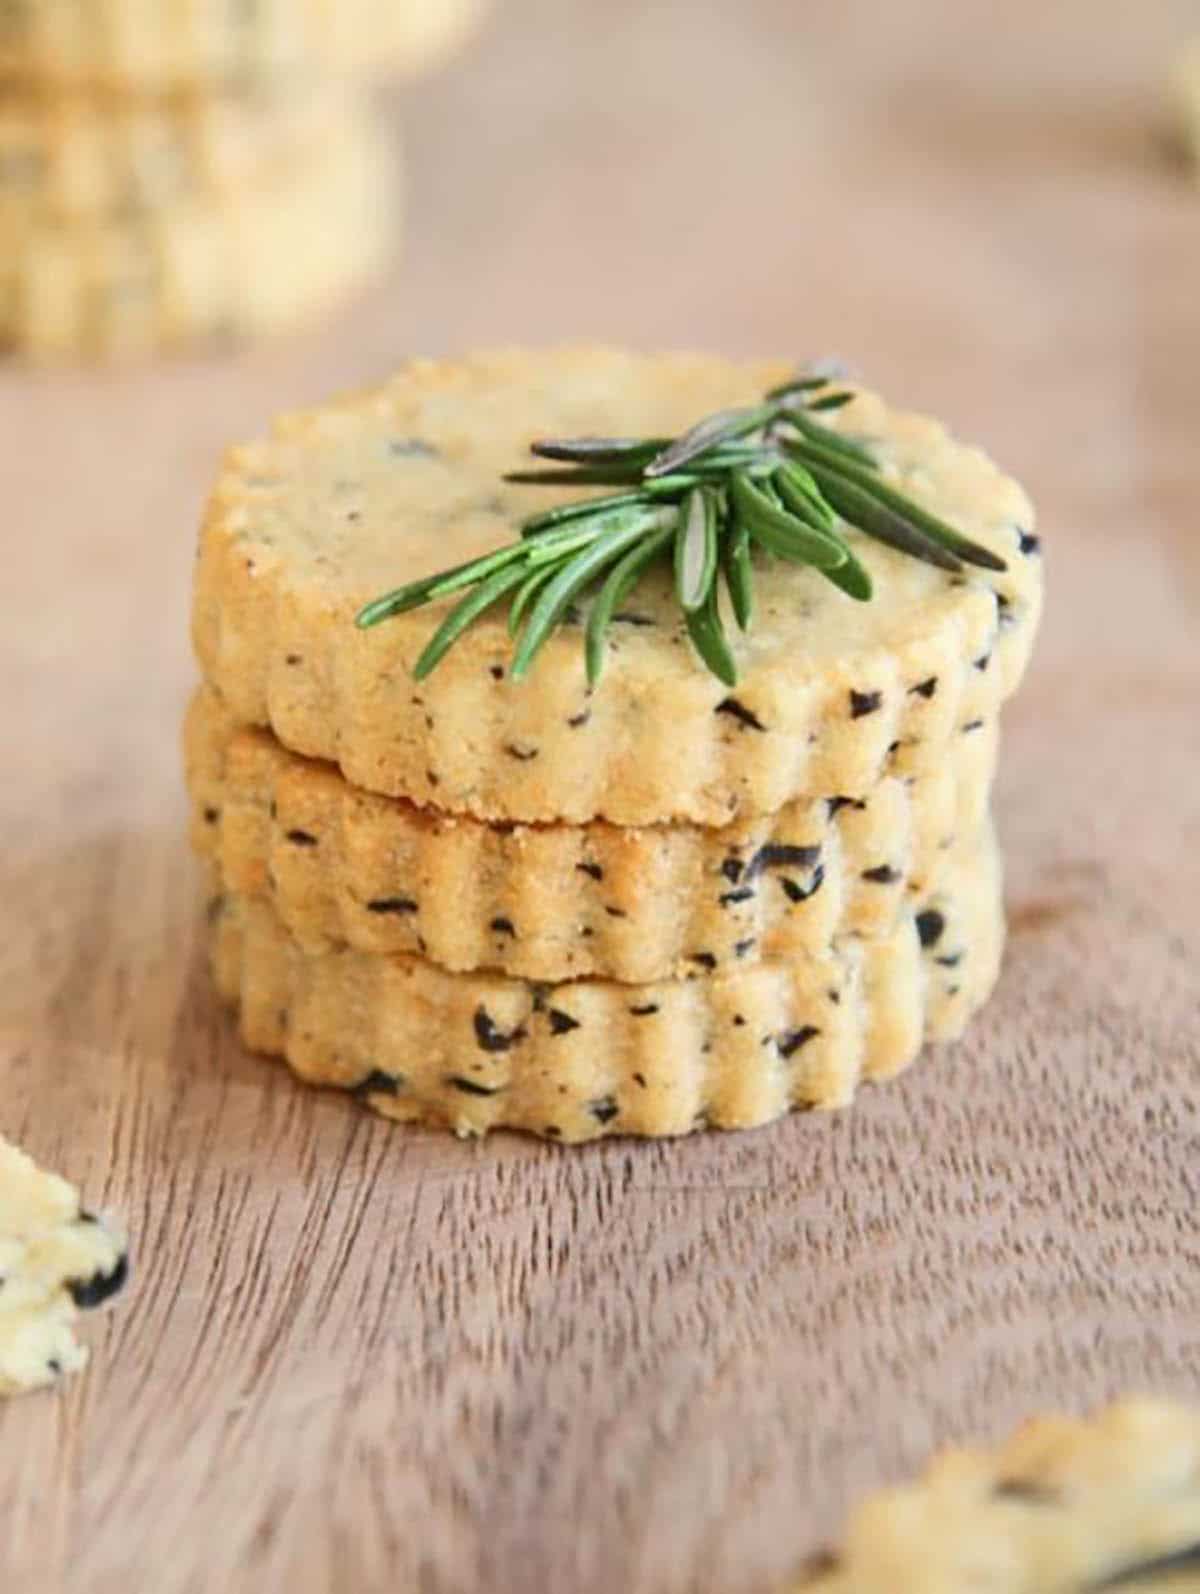 Sables made with parmesan cheese, chopped black olives, butter and flour garnished with rosemary